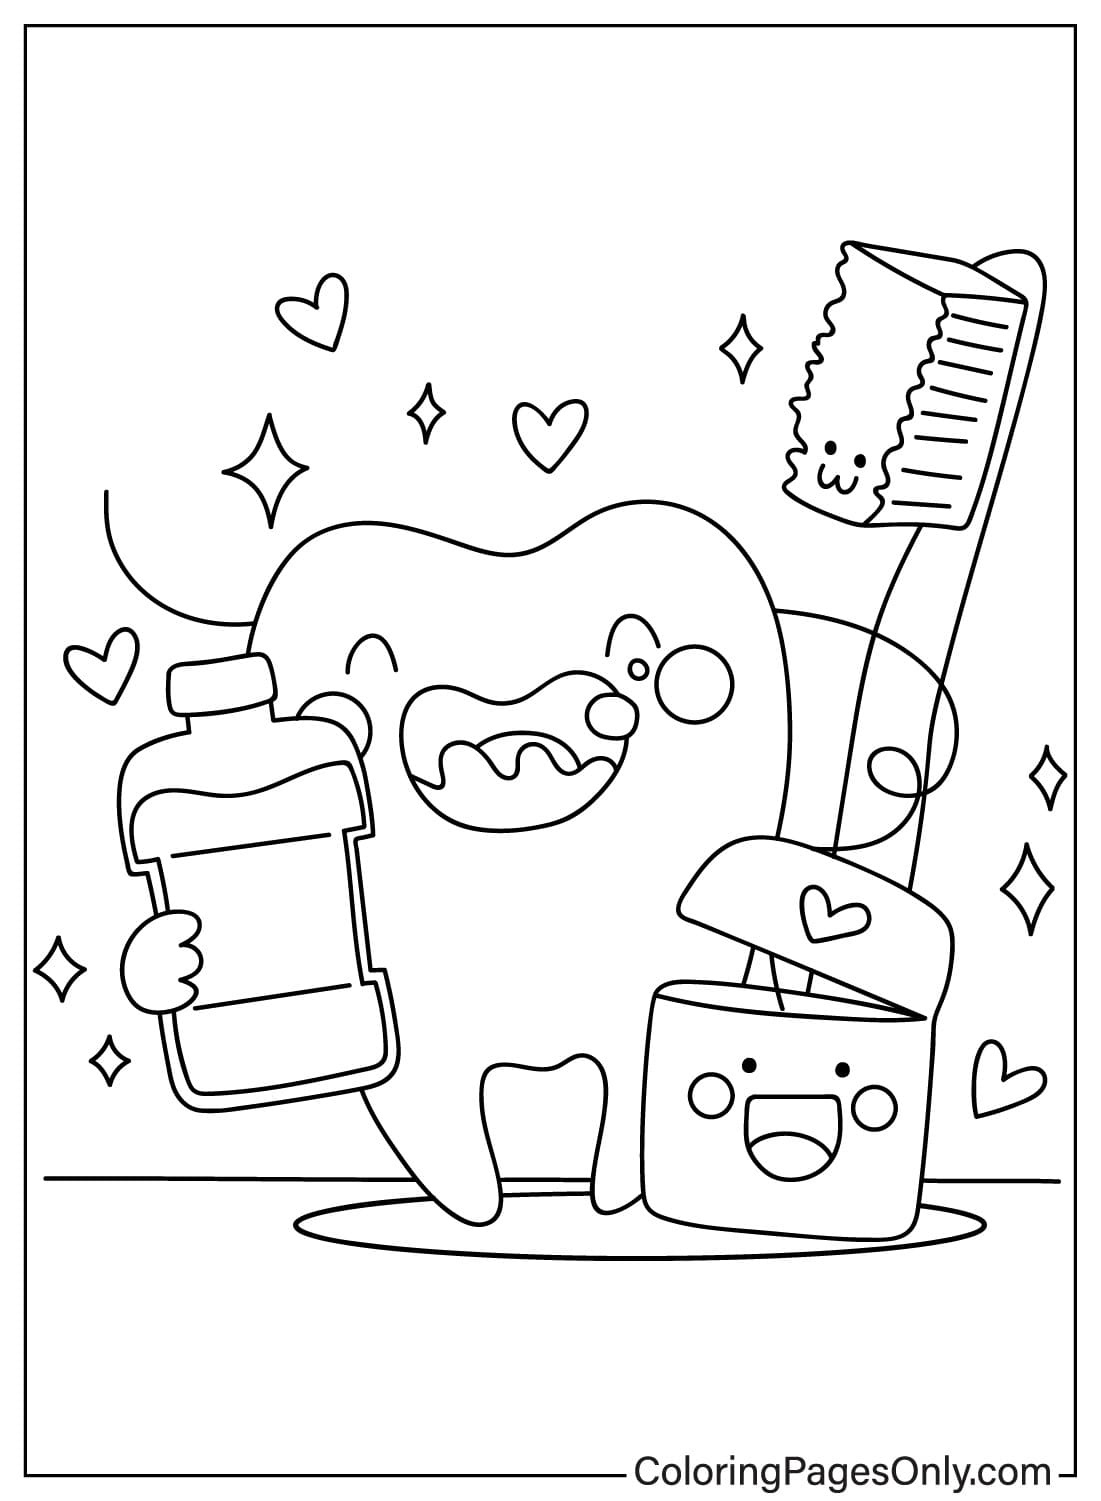 Tooth Coloring Pages to Printable Free Printable Coloring Pages